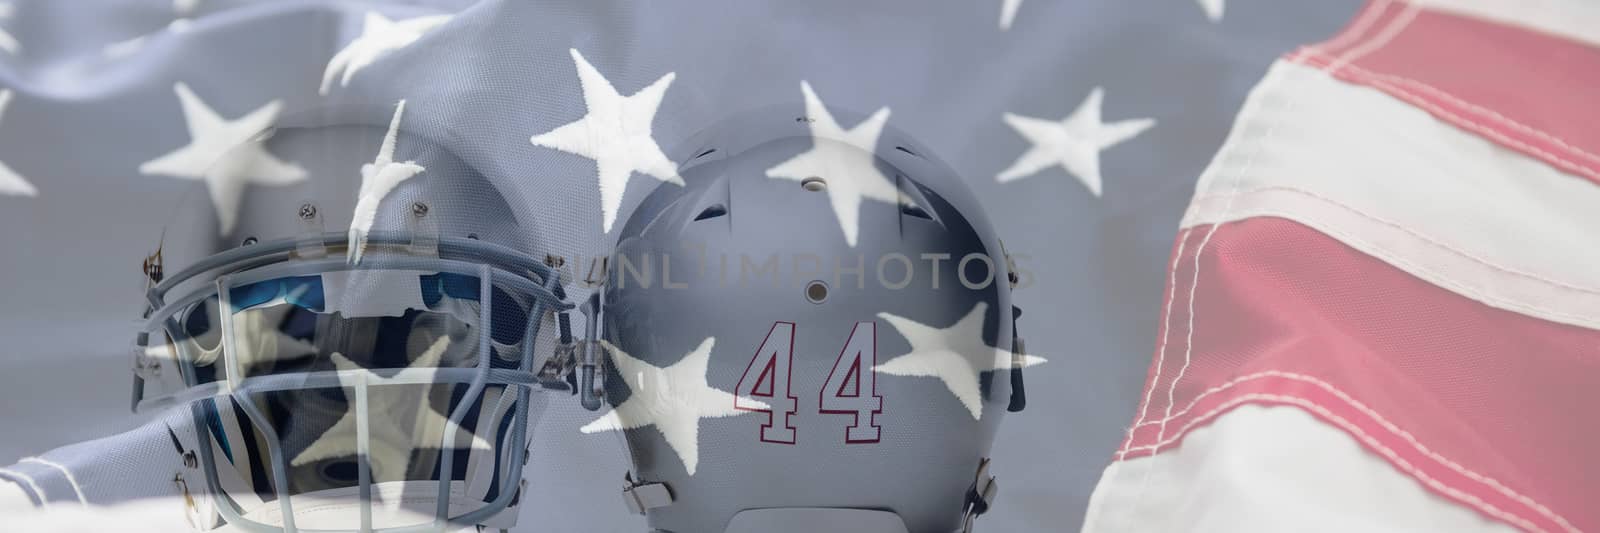 Composite image of close up of silver colored sports helmets by Wavebreakmedia